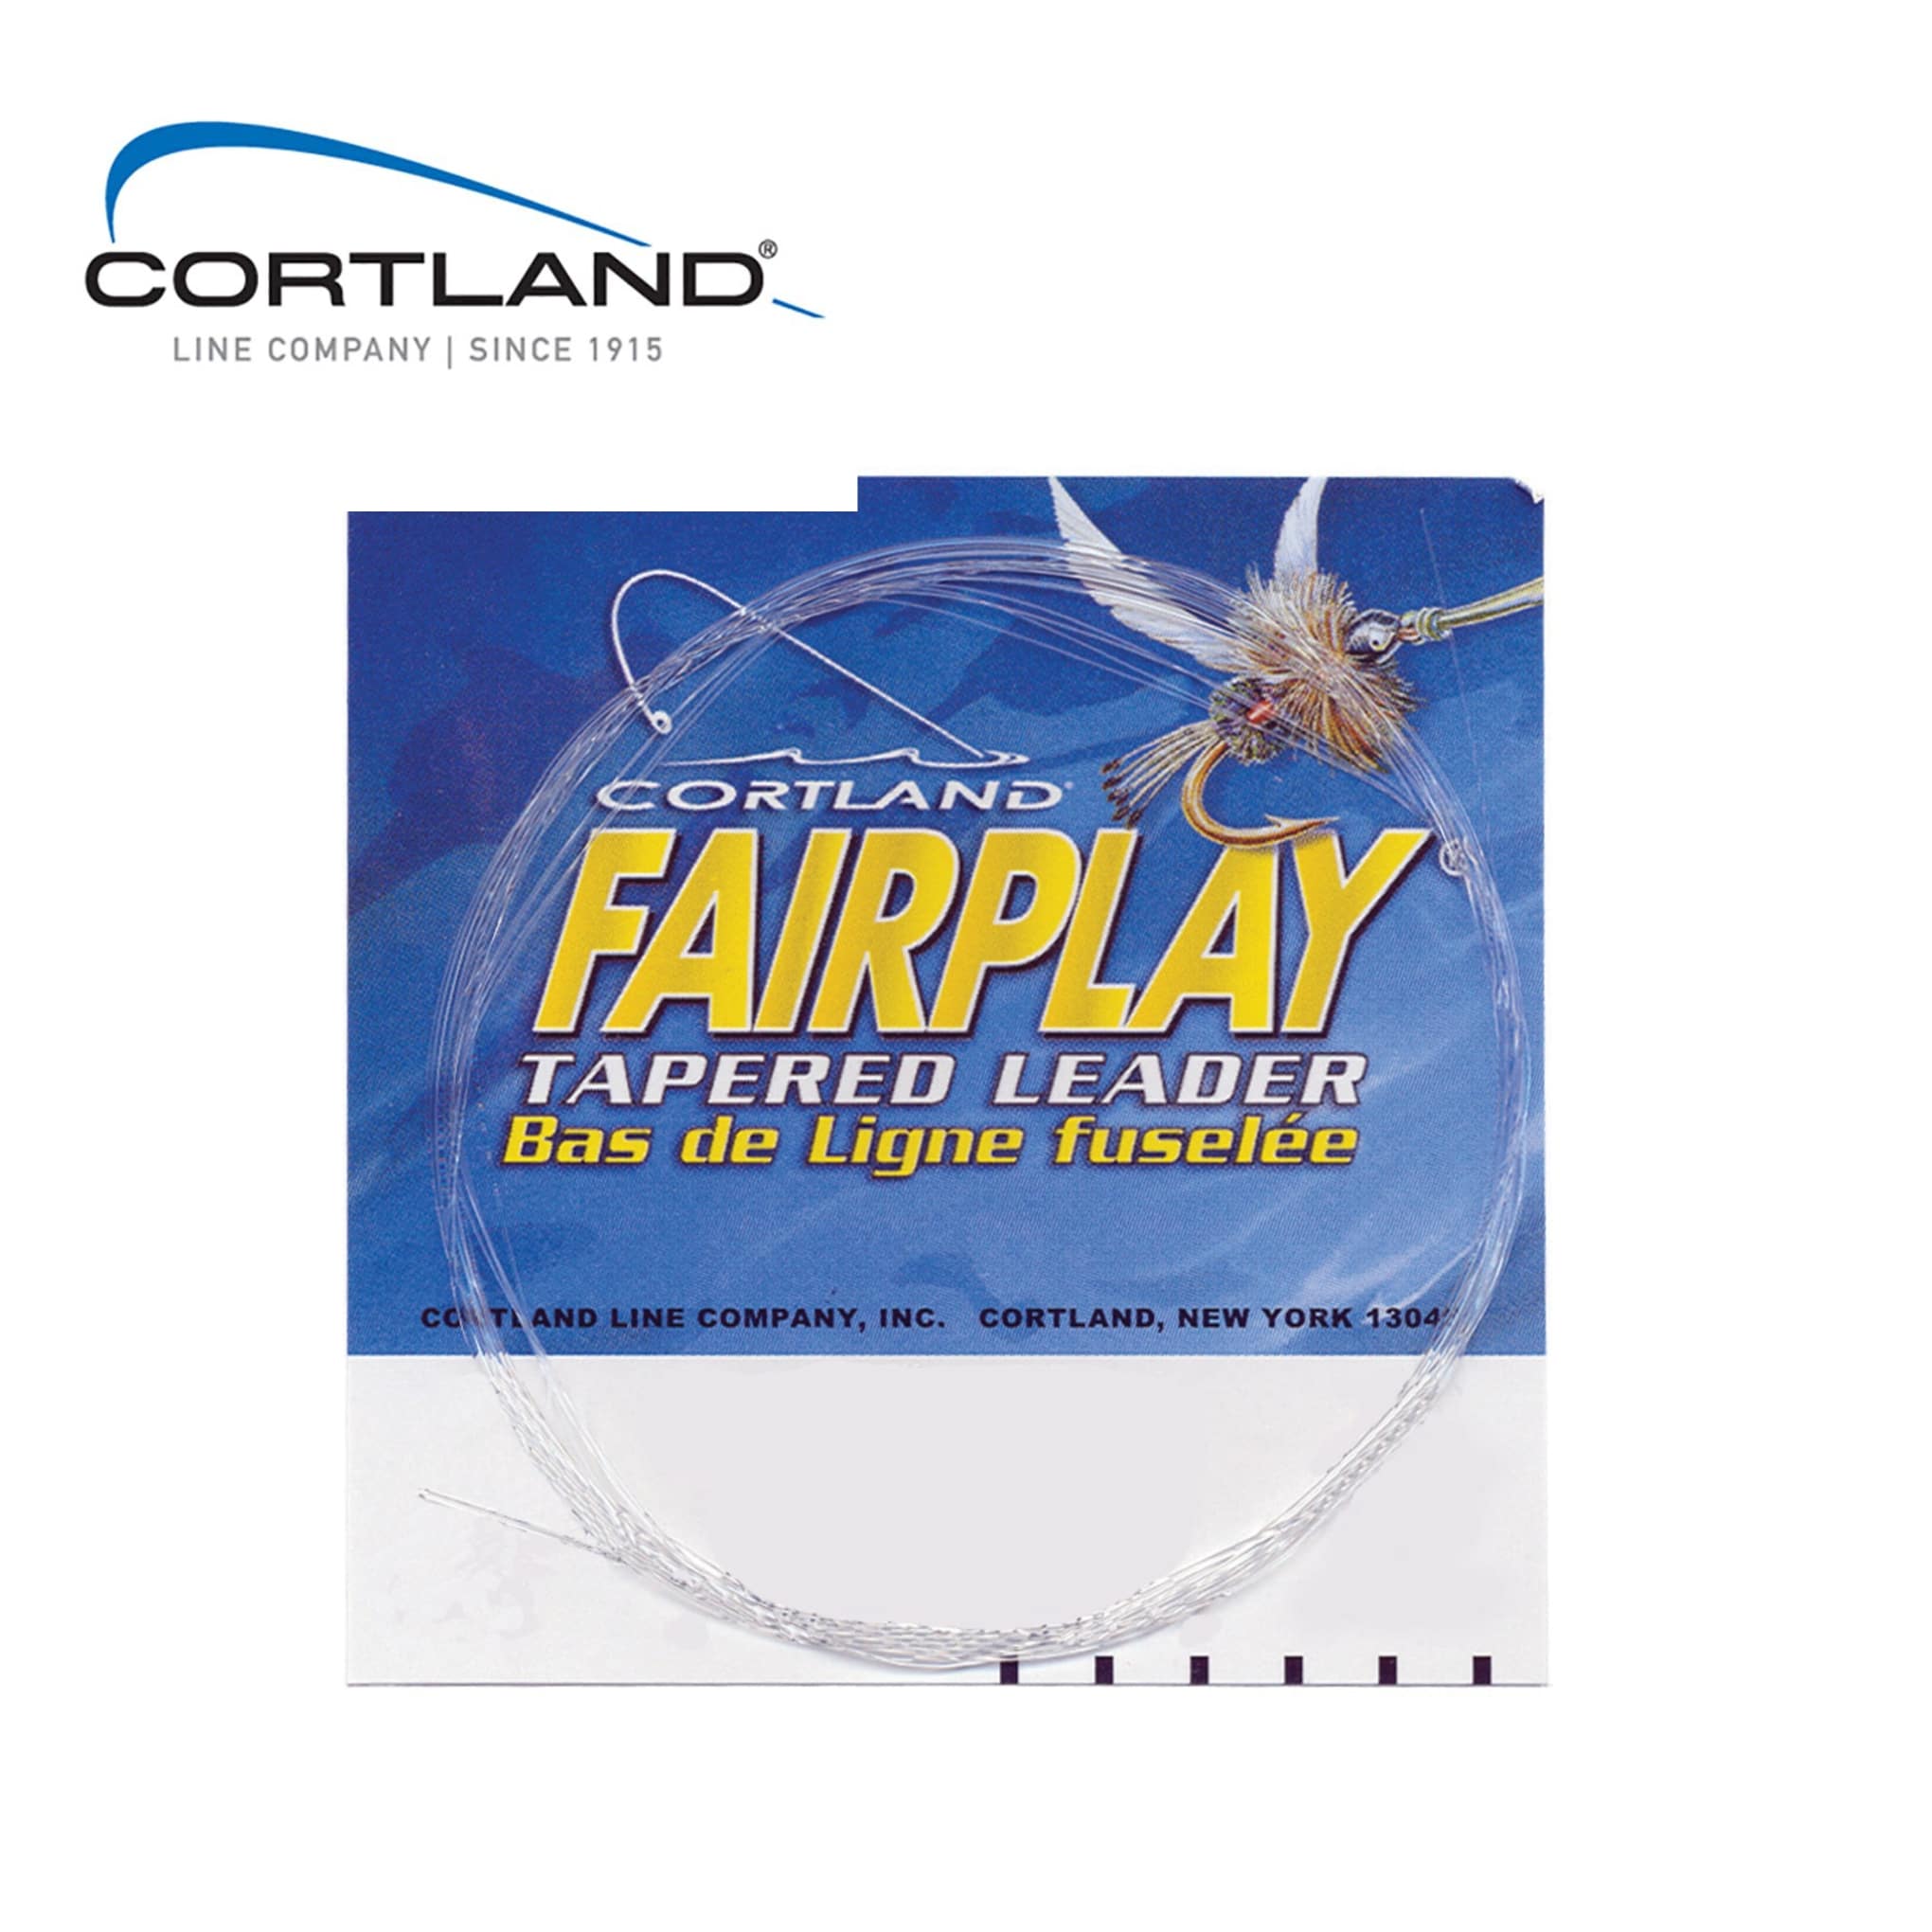 Cortland Fairplay Tapered Leader 7.5/9 ft Fly Fishing Salmon Trout Tippet  Line